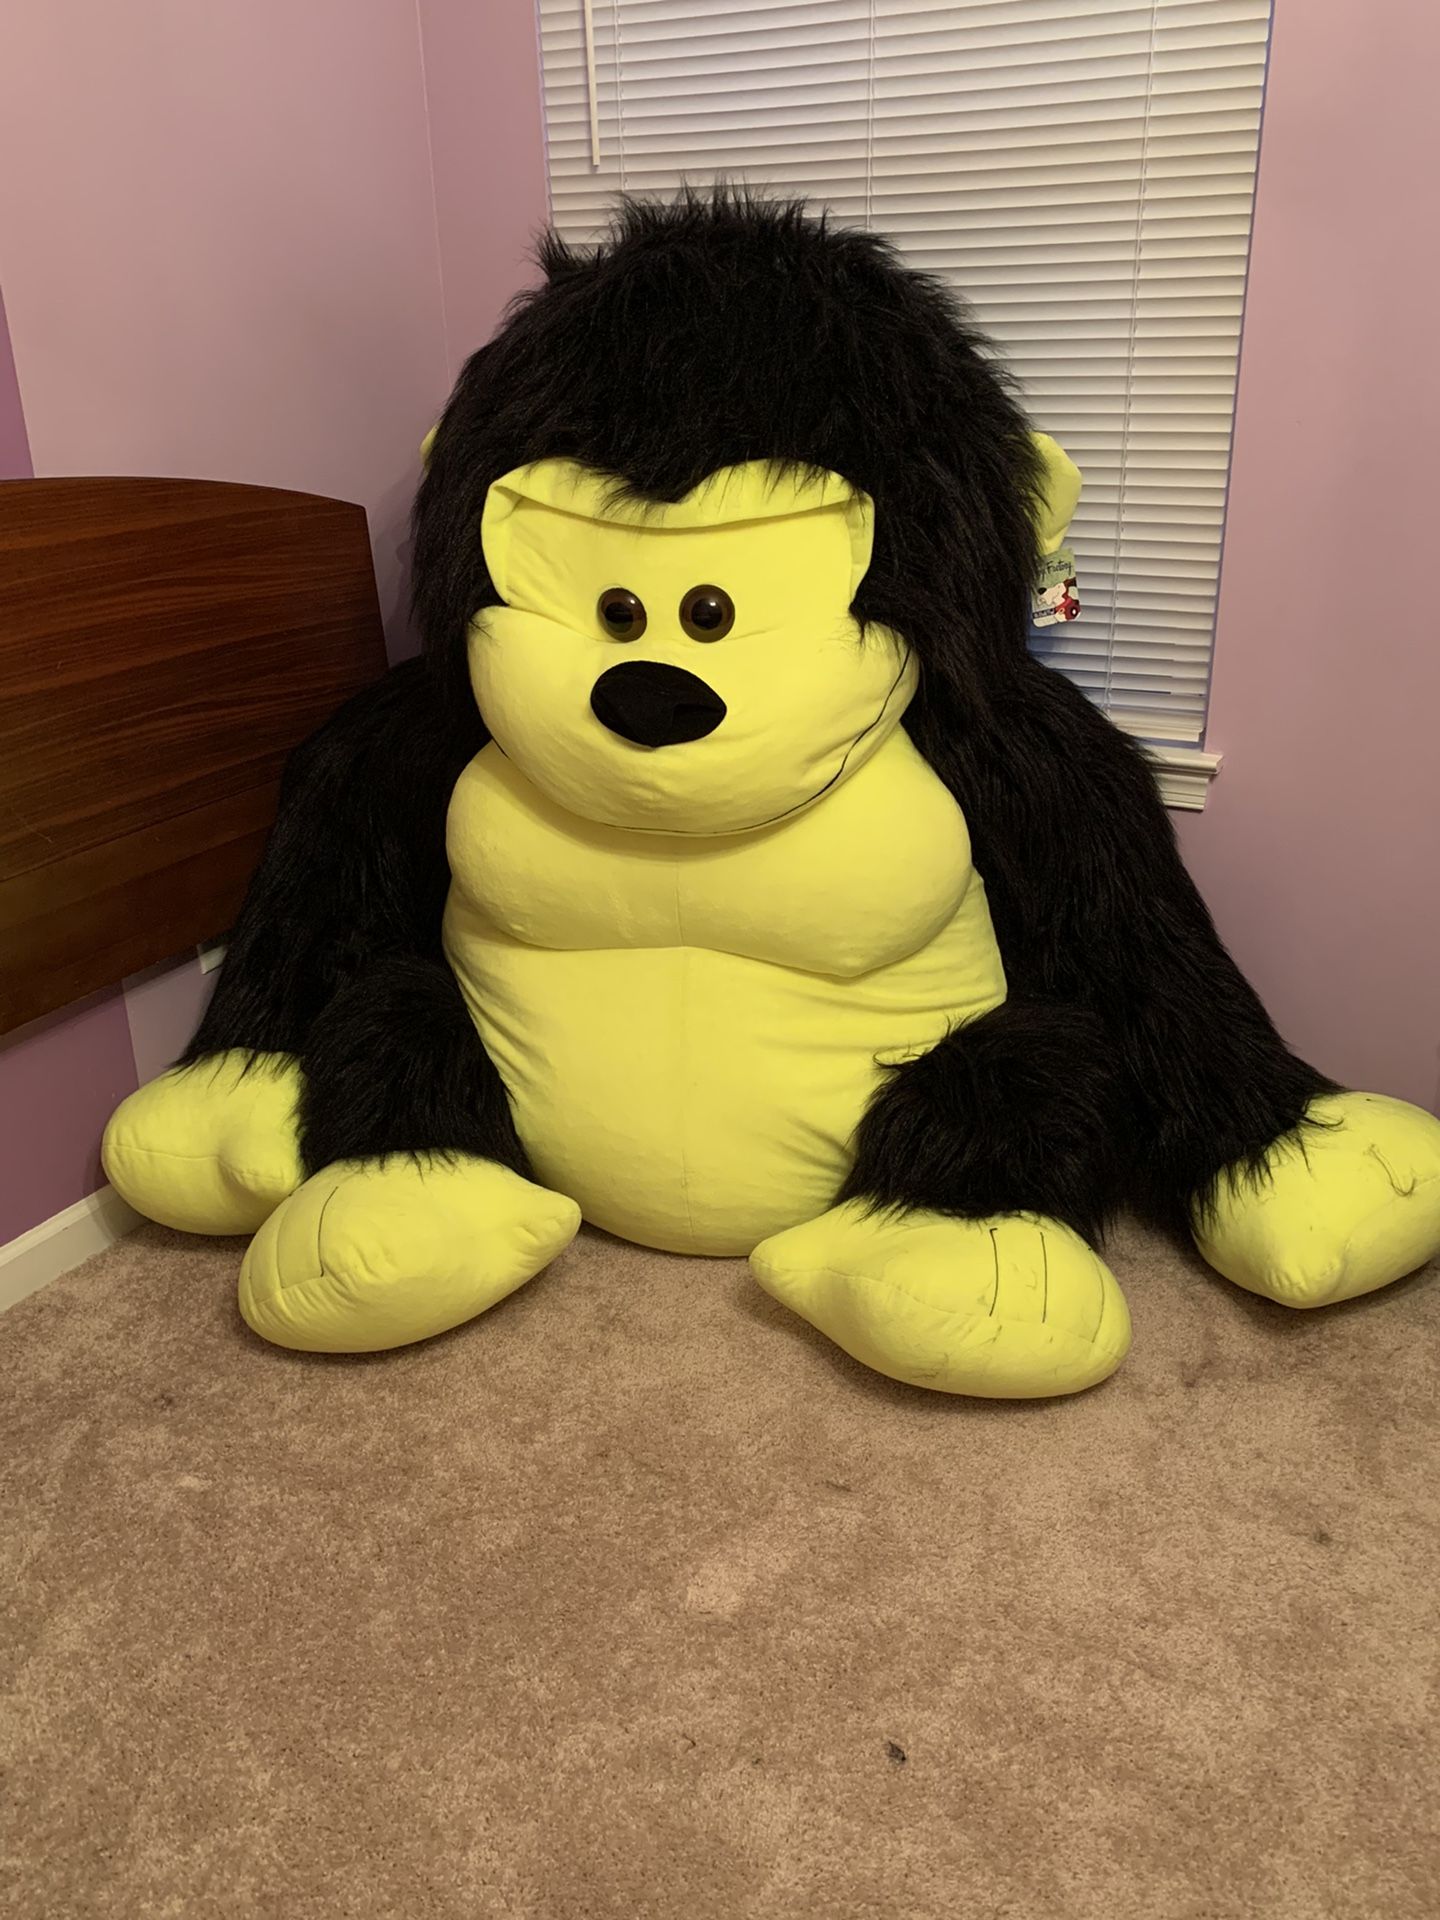 Awesome Stuffed Giant Gorilla! Best Offer!